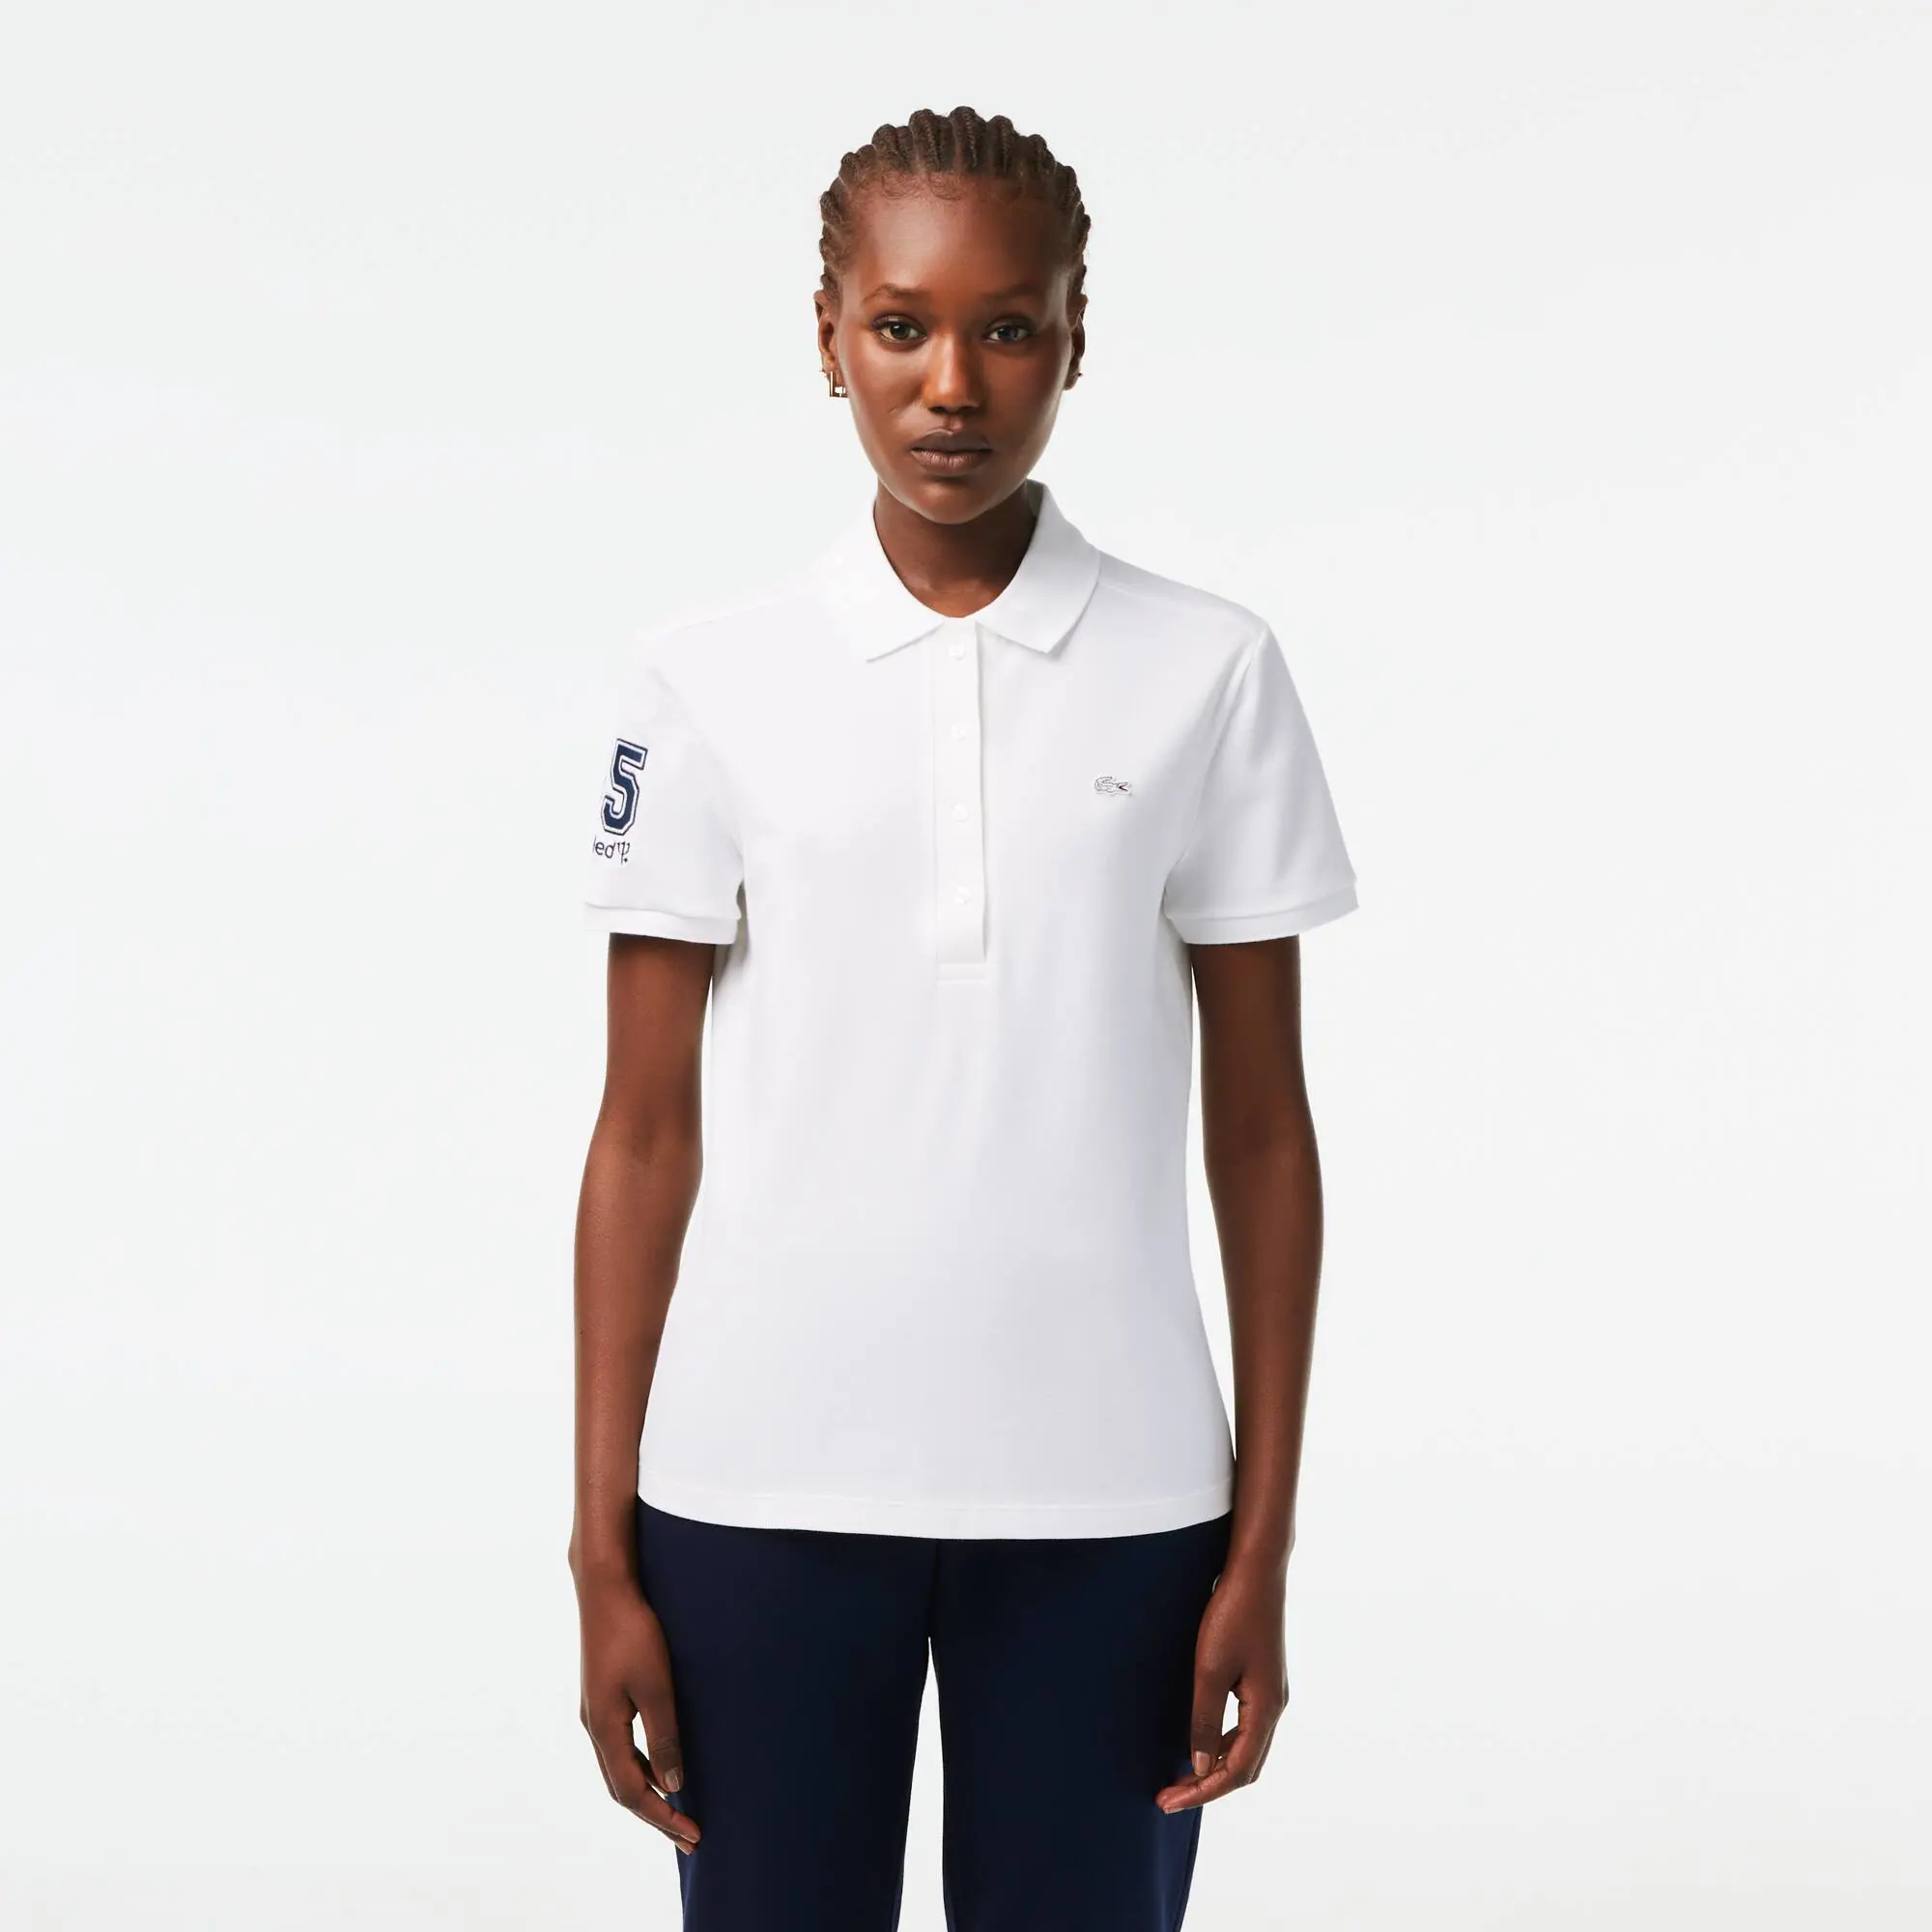 Lacoste Women’s Lacoste x Club Med Cotton Polo Shirt. 1